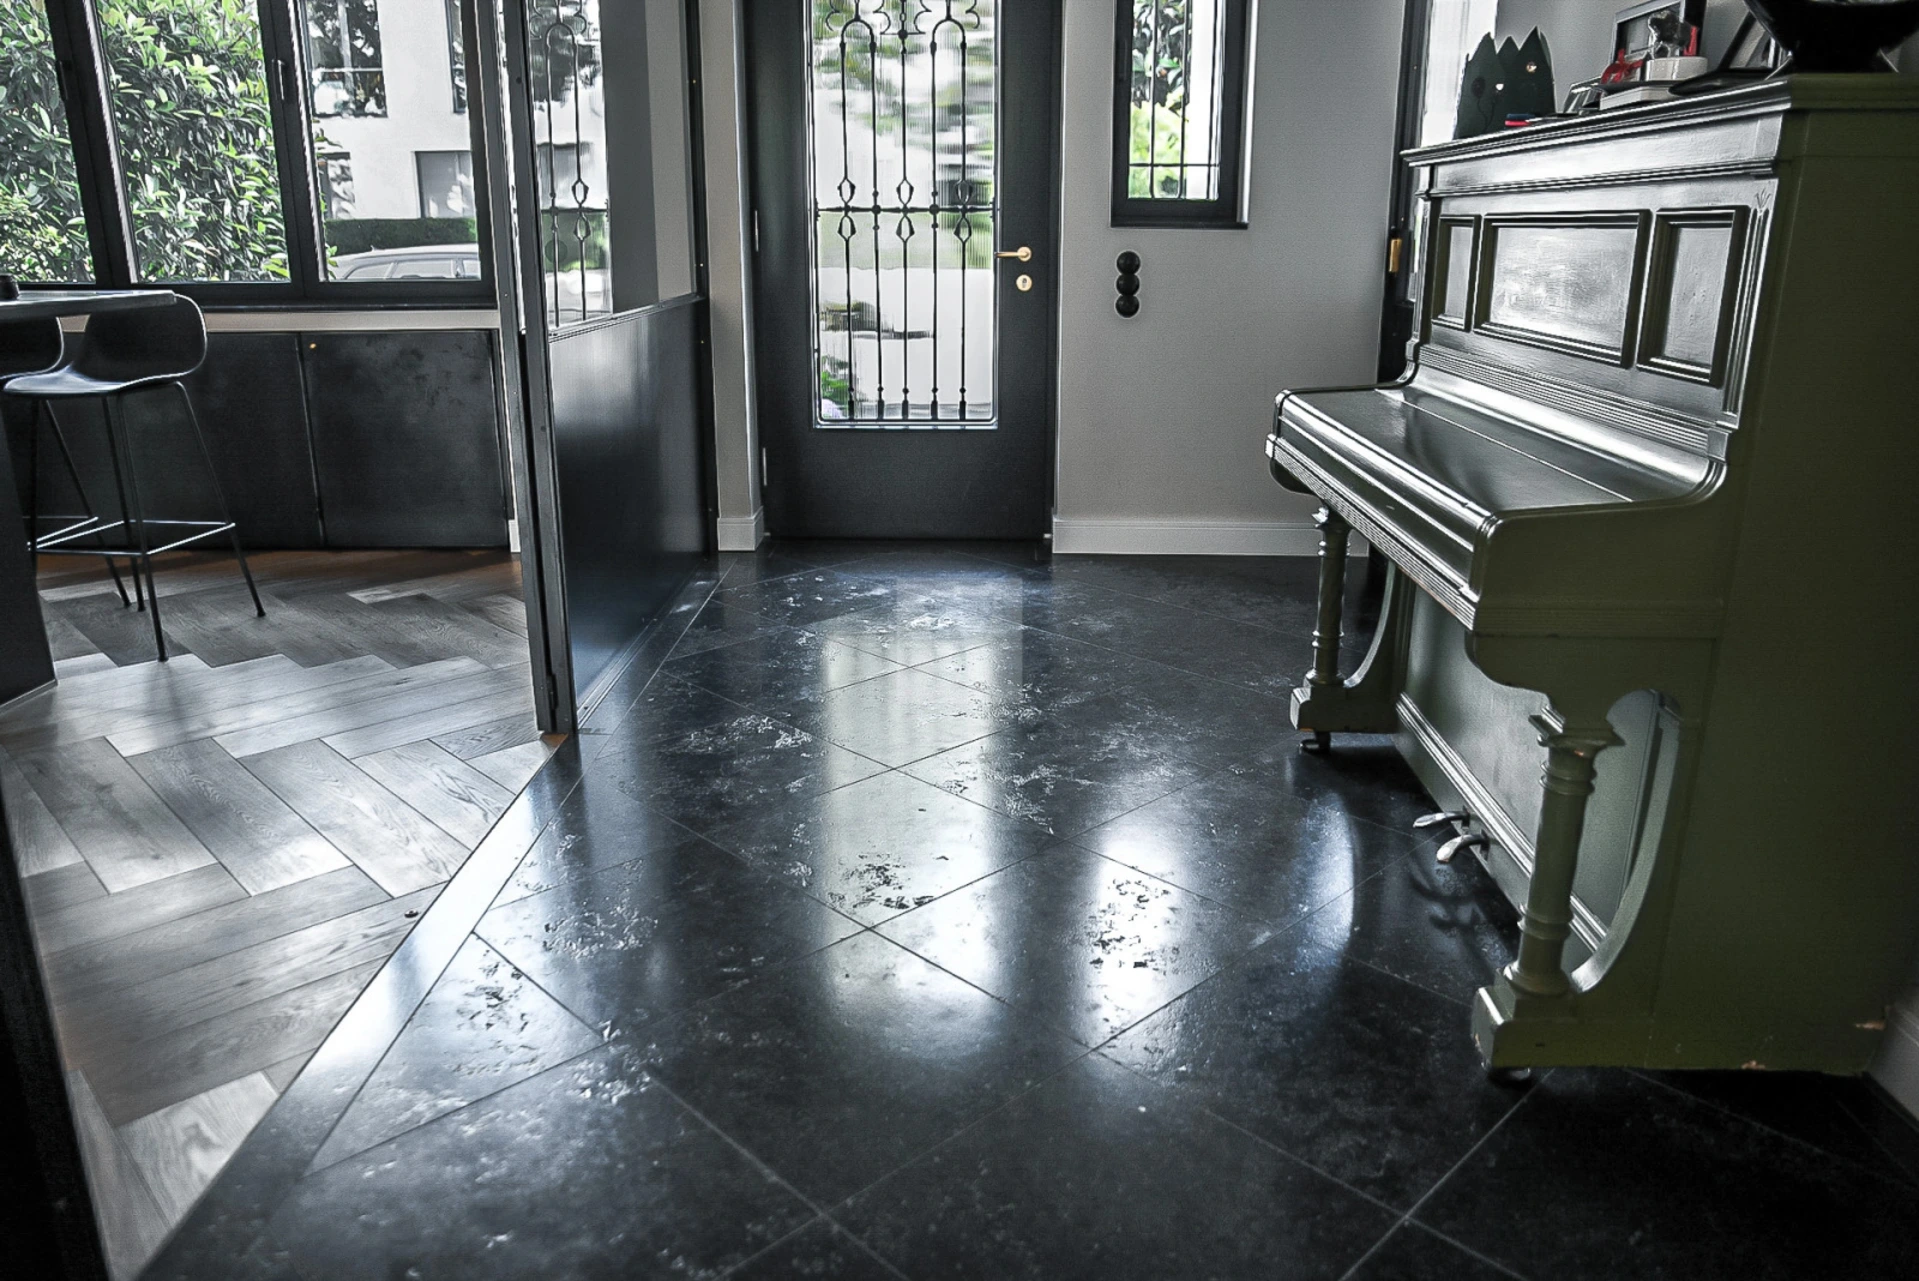 What are the various possible applications for Bluestone in an entrance hall?